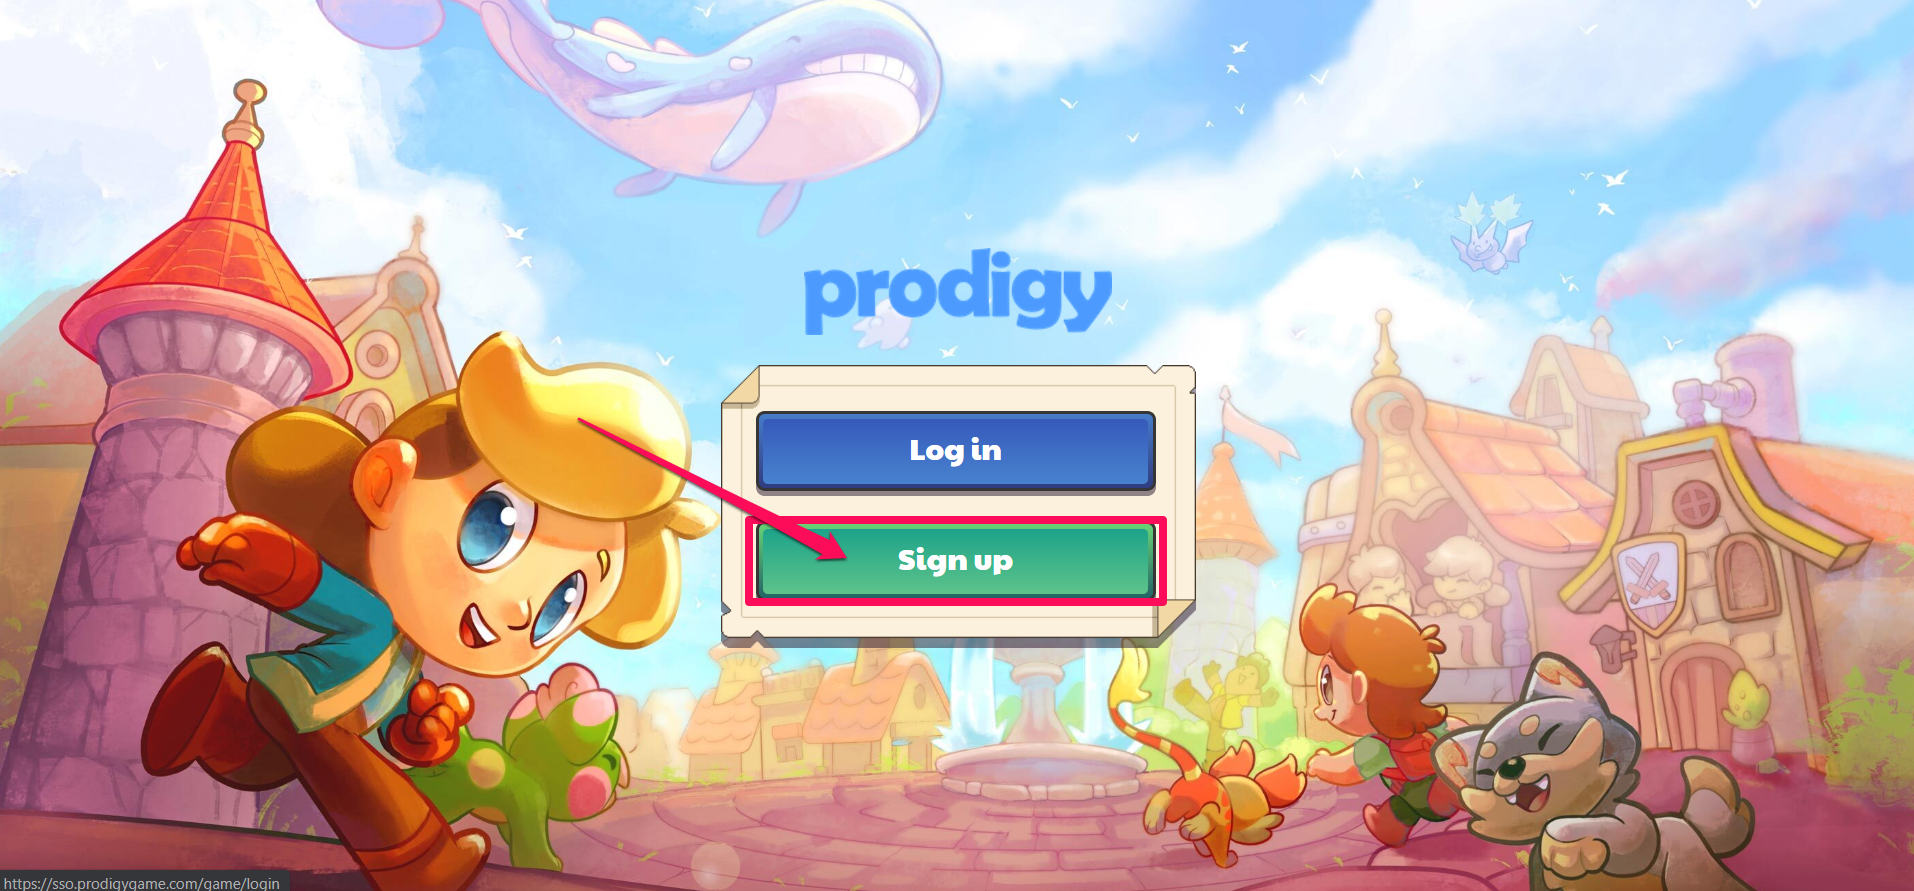 membership for prodigy